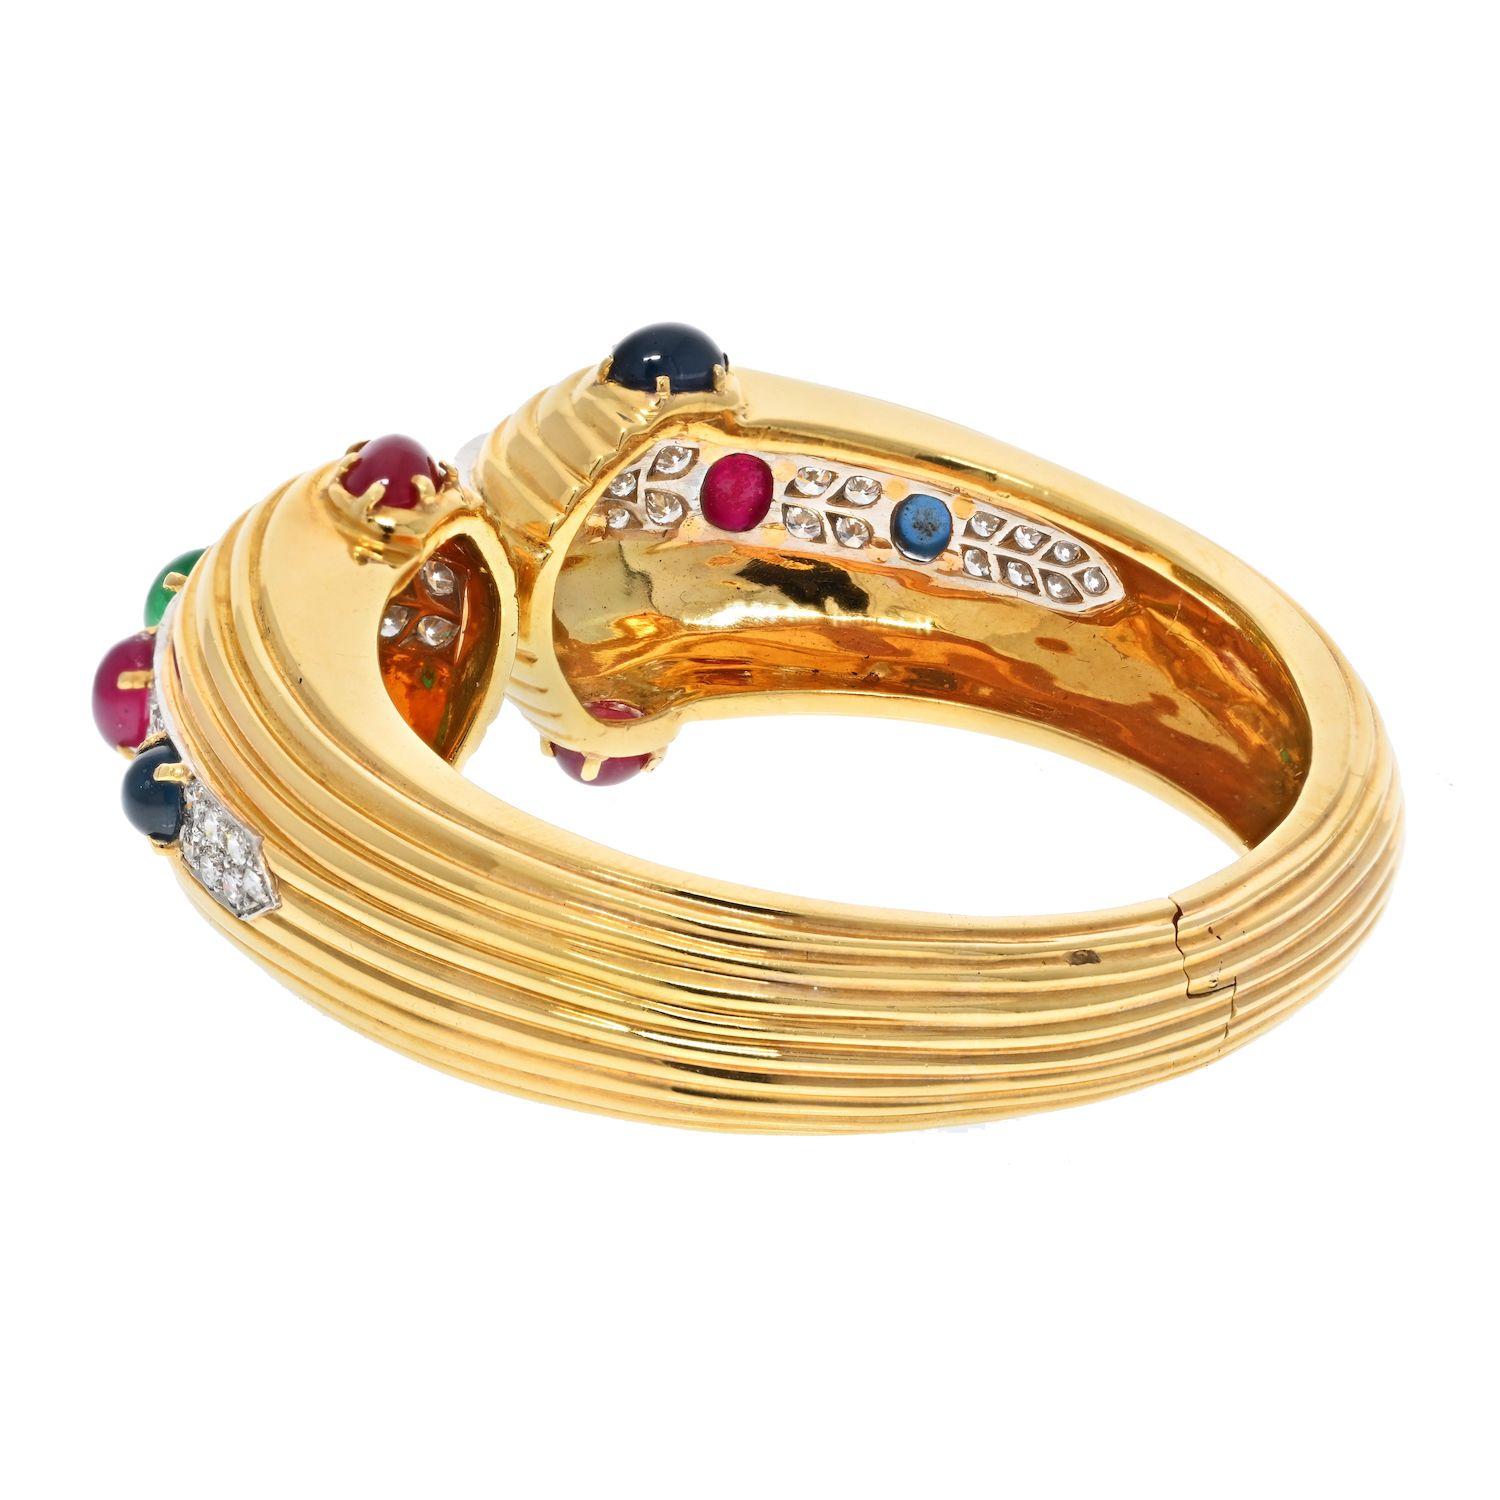 David Webb: made of 18k yellow gold this bracelet is of a hinged design. Fits as if it's a bangle with an easy mechanism to put it on and off. 
Encrusted with beautiful gems like rubes, sapphires and emeralds of oval cabochon cut as well as a touch